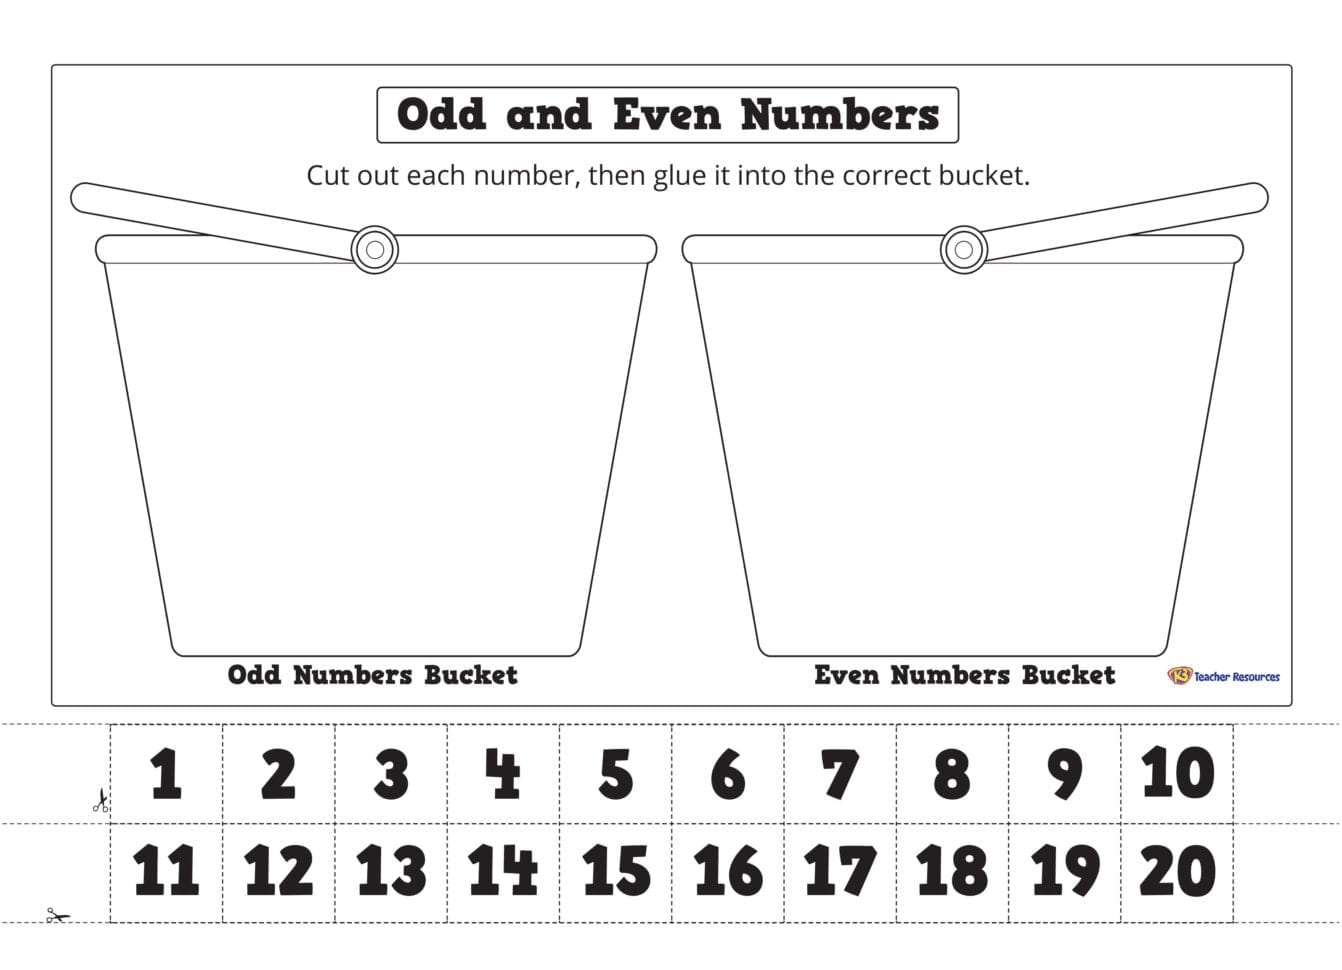 Odd And Even Numbers Cut And Paste Bucket Worksheet K3 — db-excel.com